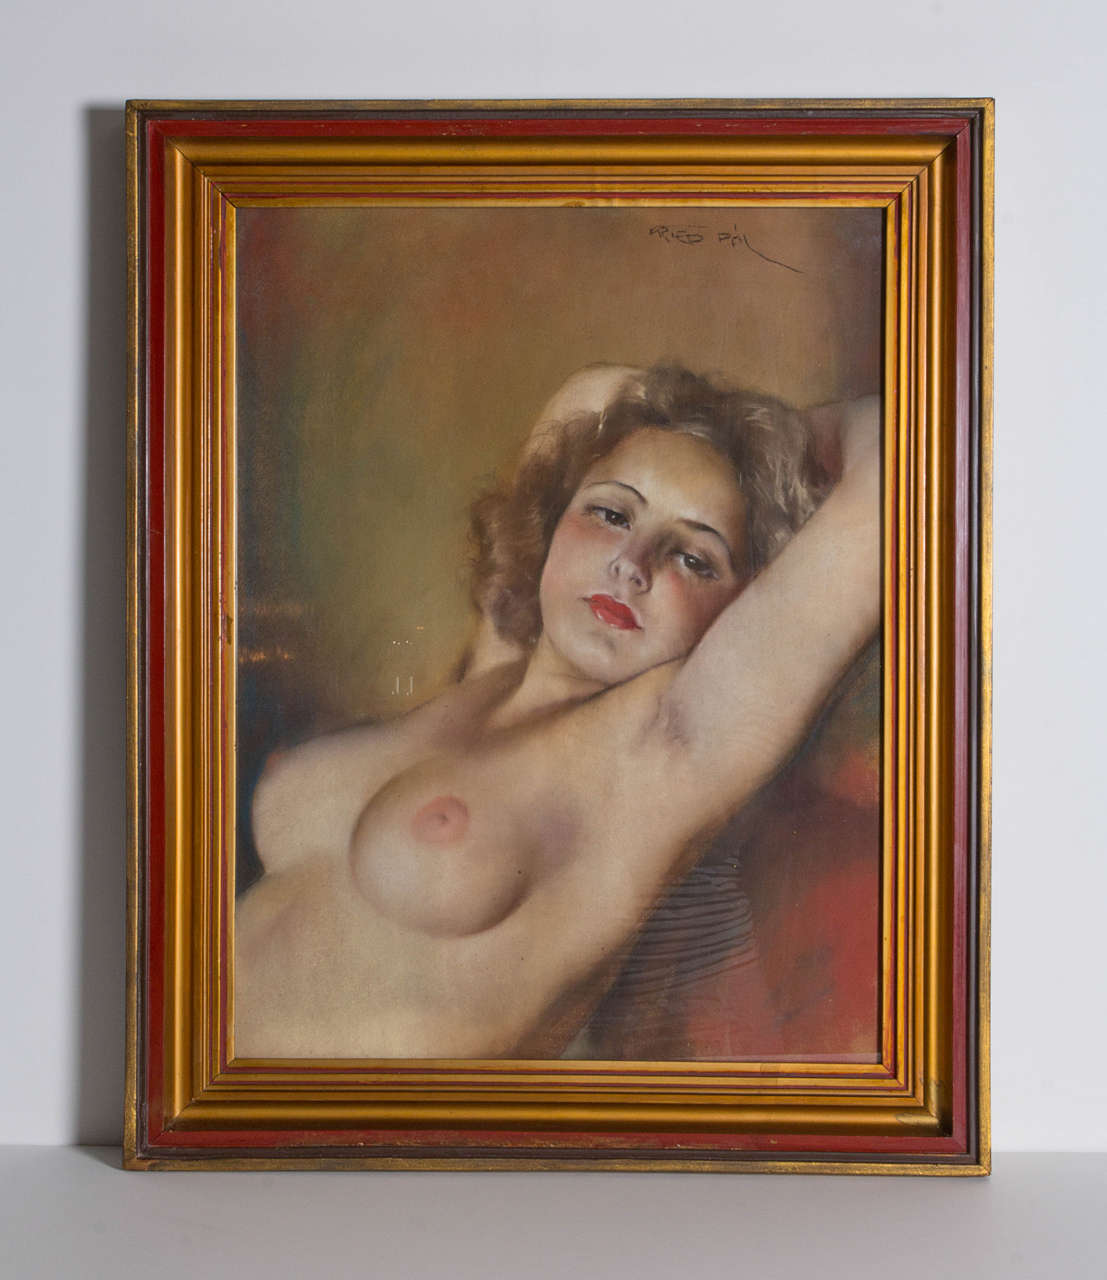 A fabulously rendered, realistic portrayal of a nude in original frame signed:
 Fried Pal. 
Hand painted pastel under glass.
 Pal Fried was a  Hungarian/ American artist  who was influenced by Impressionist artists like Renoir and Degas.
 The